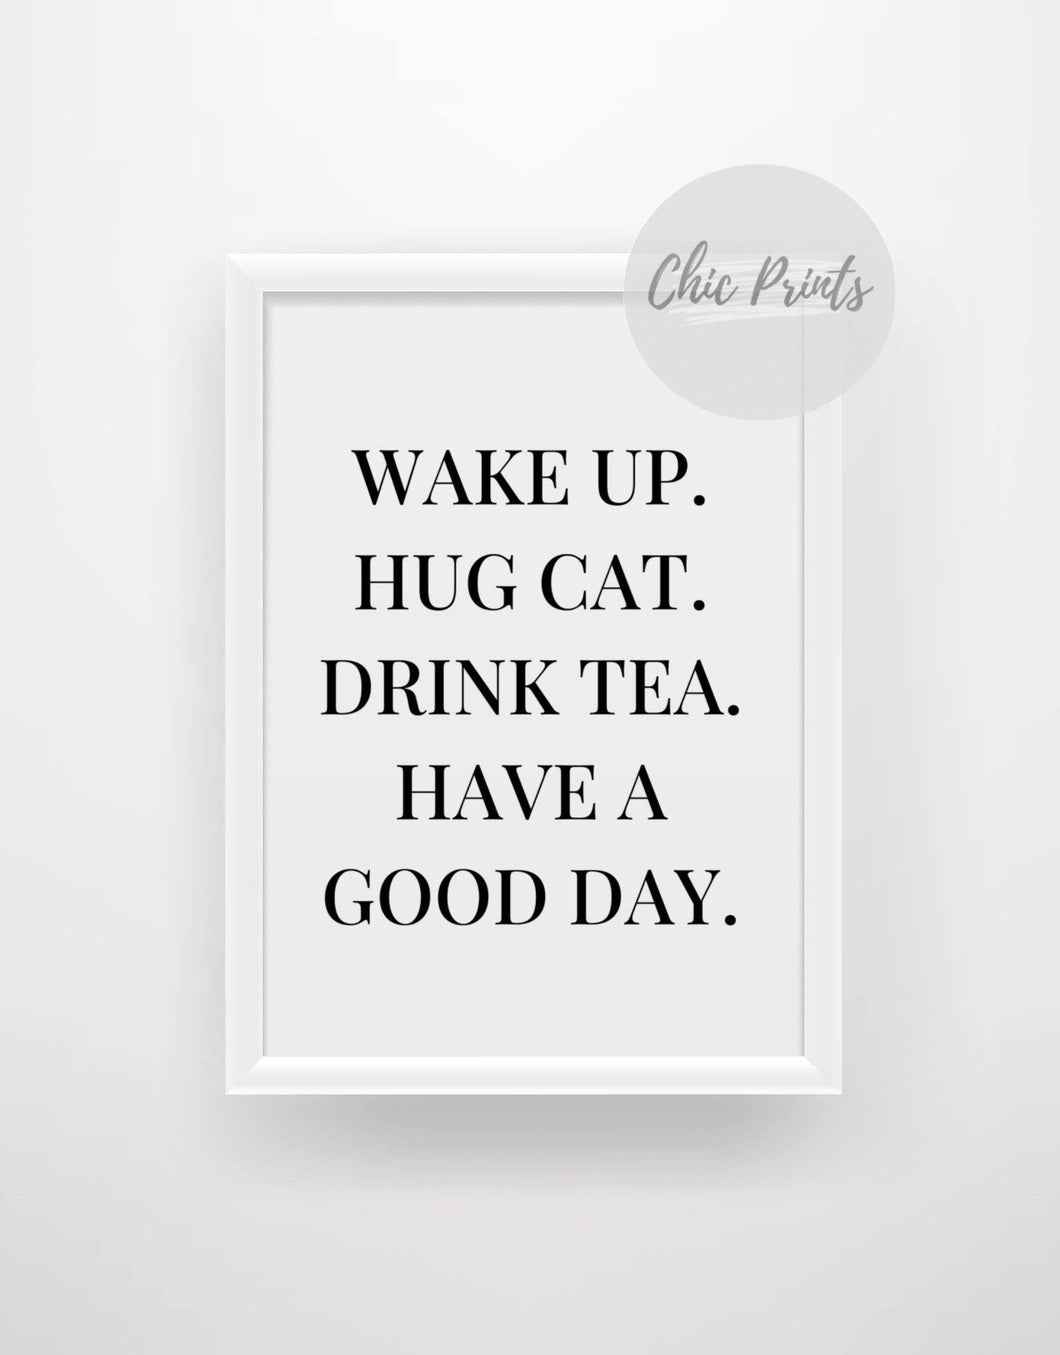 Wake up, hug cat, drink tea, have a good day - Chic Prints